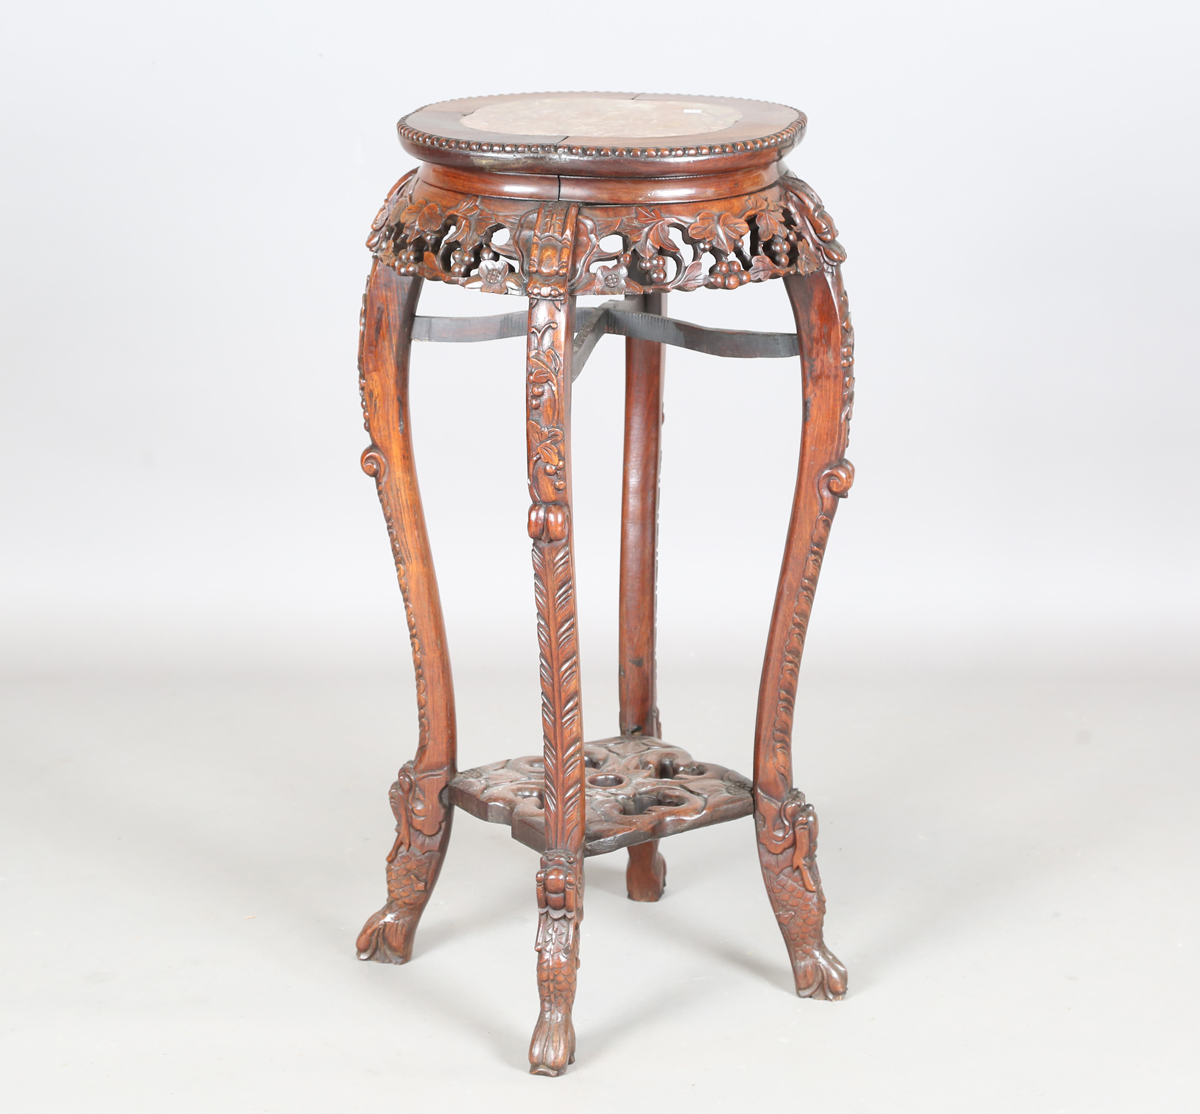 A Chinese hardwood jardinière stand, early 20th century, the quatrelobed top inset with a rouge